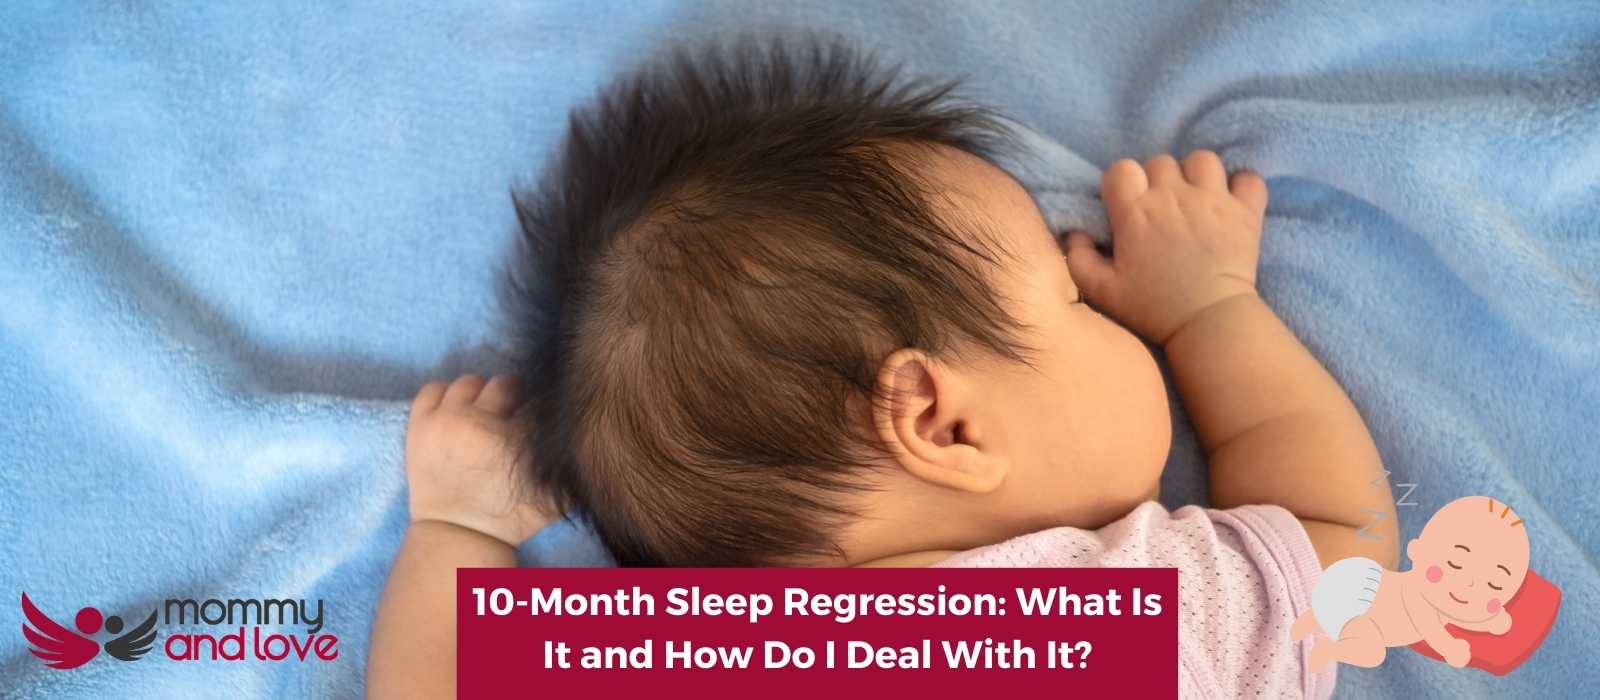 10-Month Sleep Regression What Is It and How Do I Deal With It